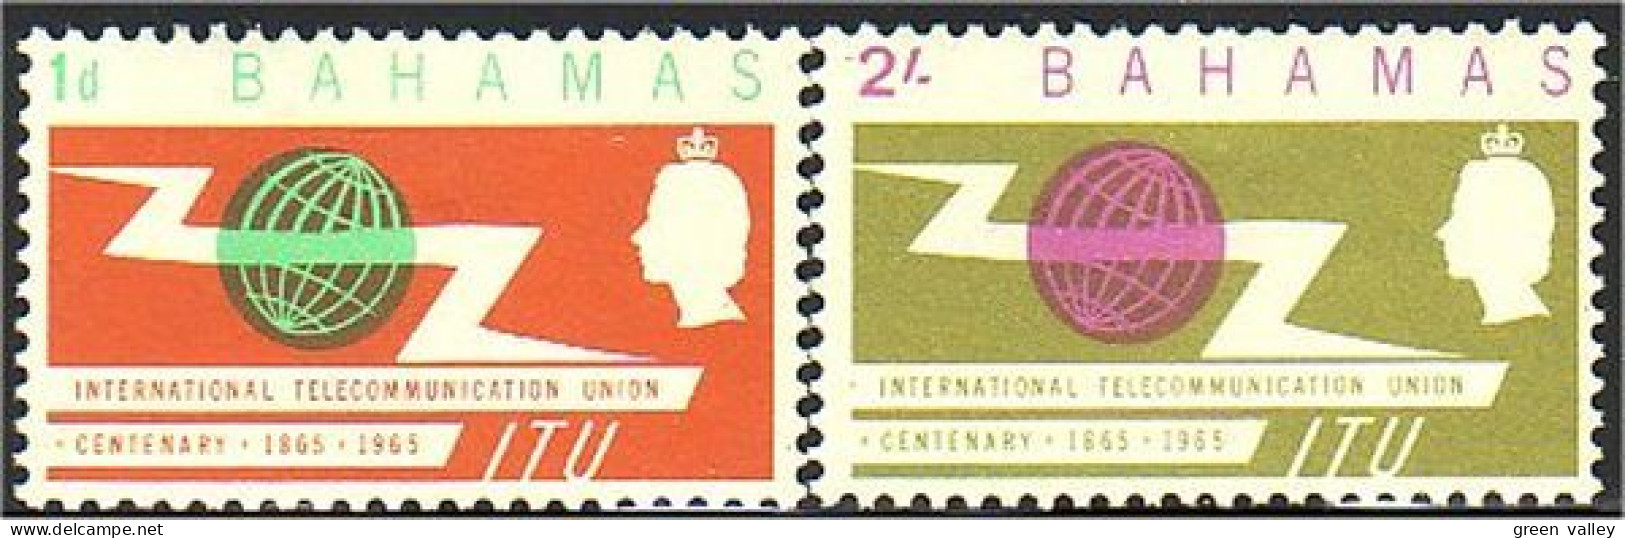 164 Bahamas Telecom ITU UIT MH Communications * Neuf (BAH-54a) - 1963-1973 Ministerial Government